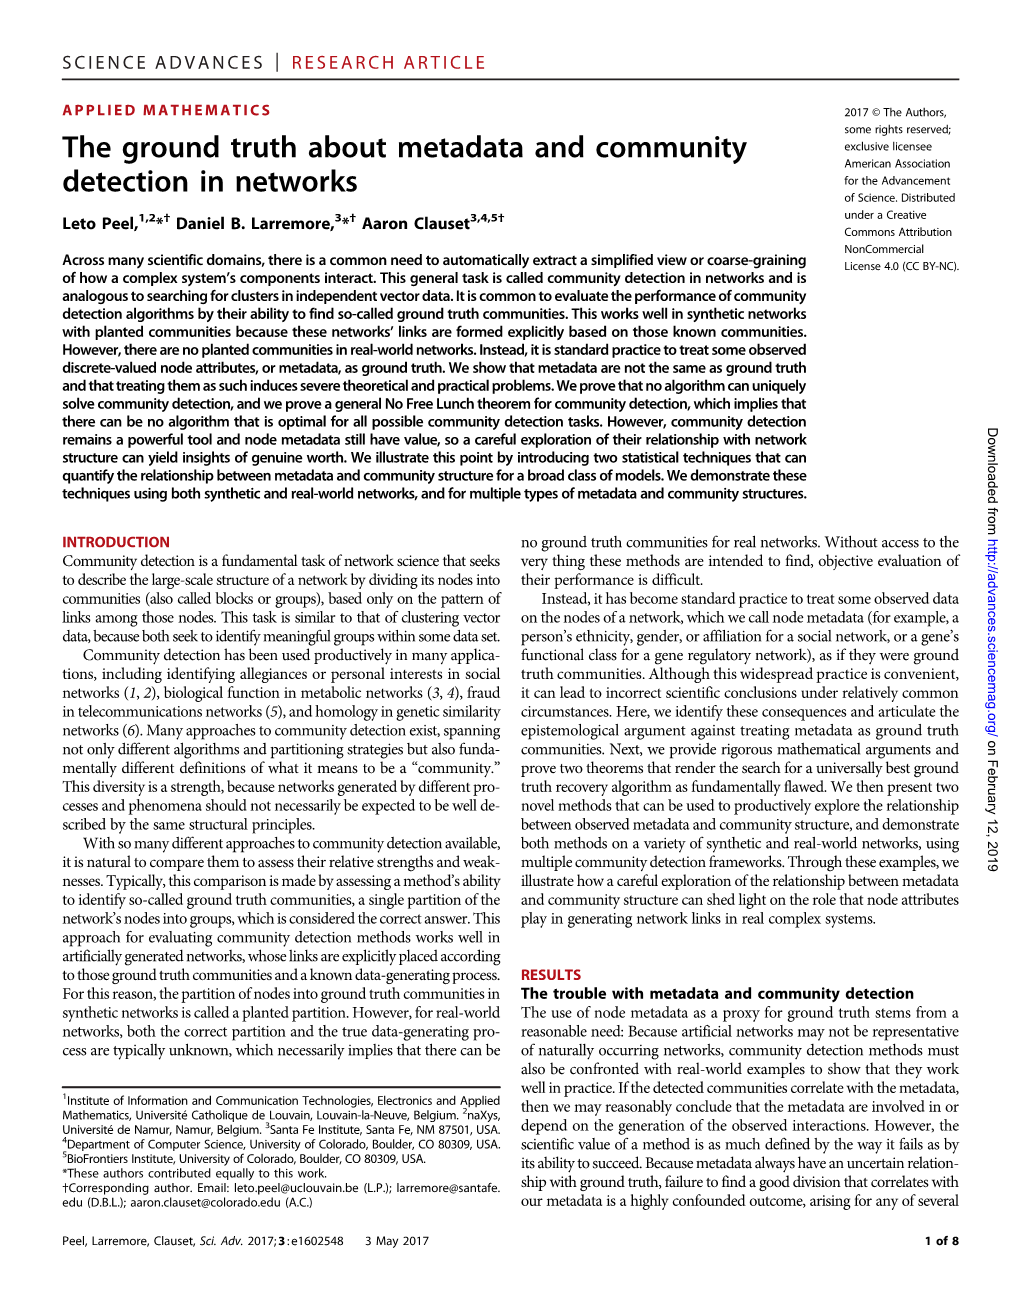 The Ground Truth About Metadata and Community Detection in Networks Leto Peel, Daniel B